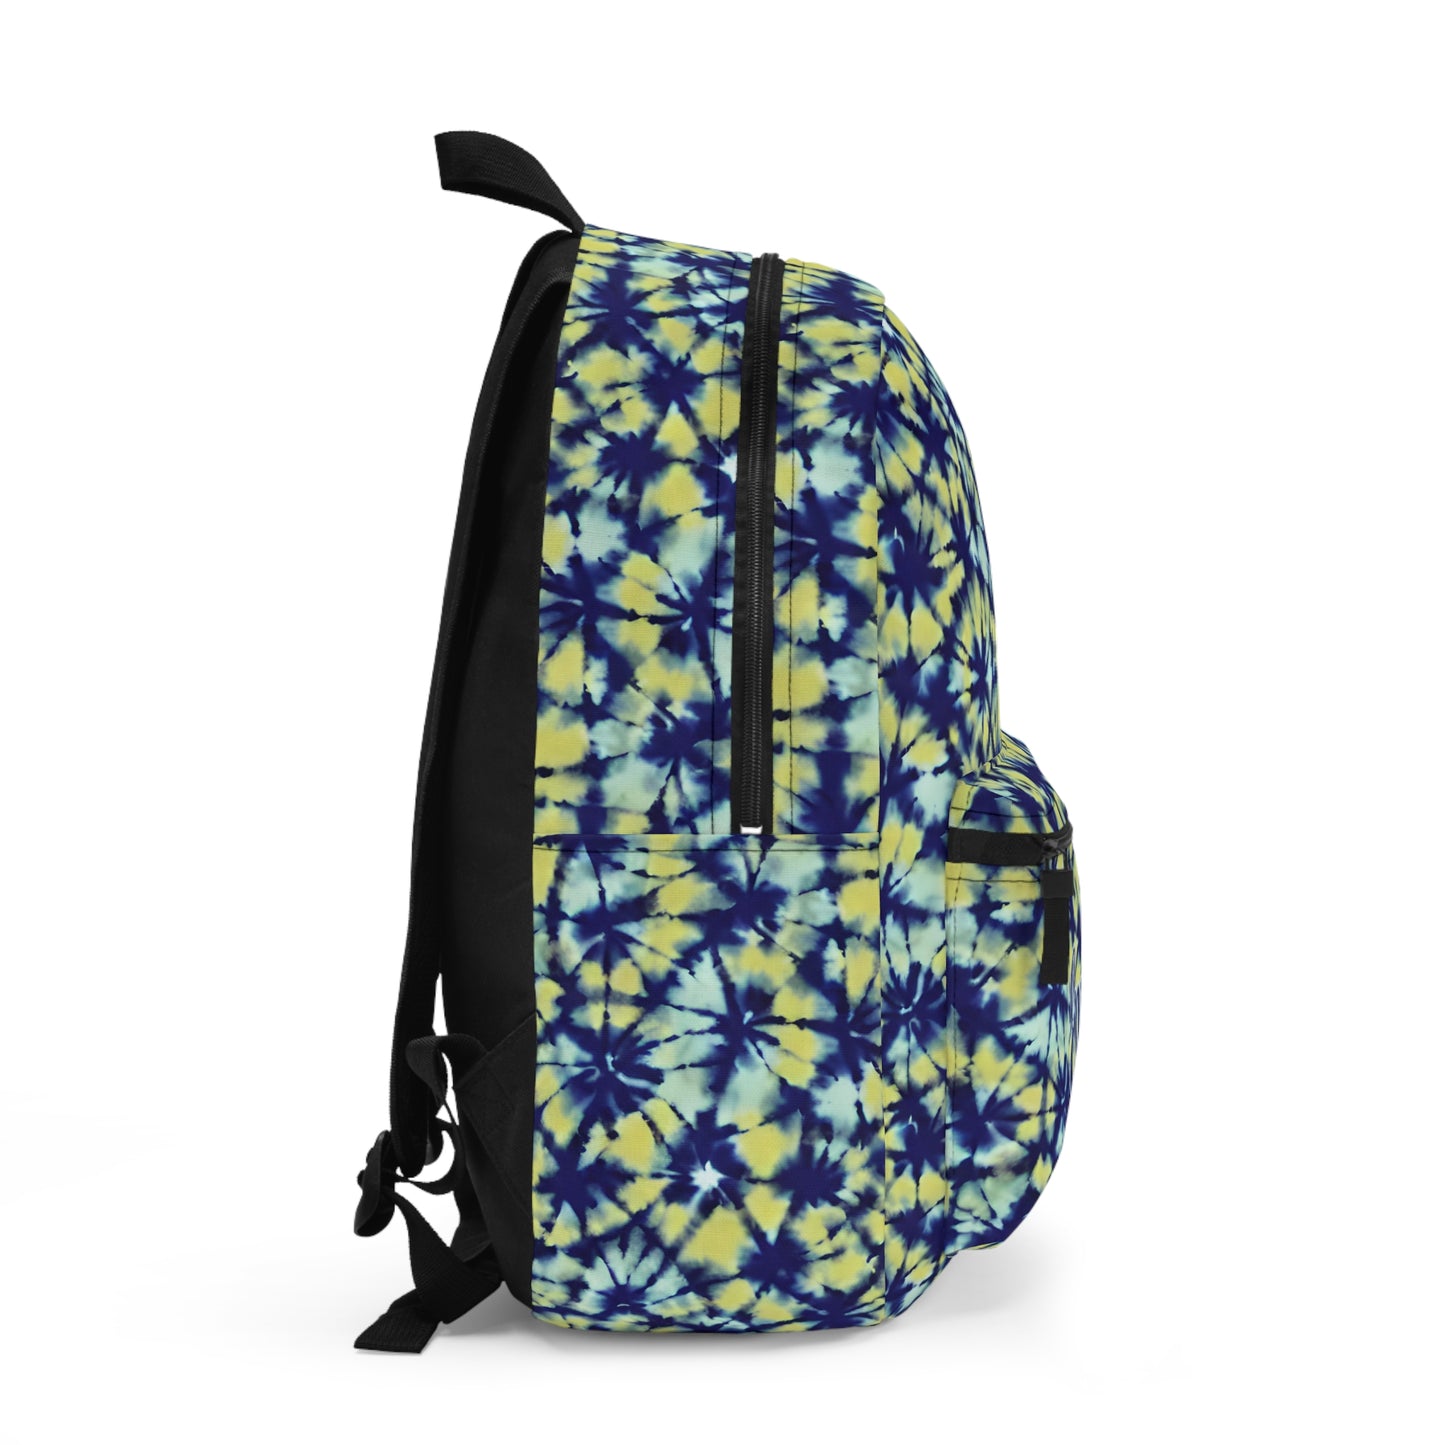 Blue Tie Dye Backpack / Personalized Backpack